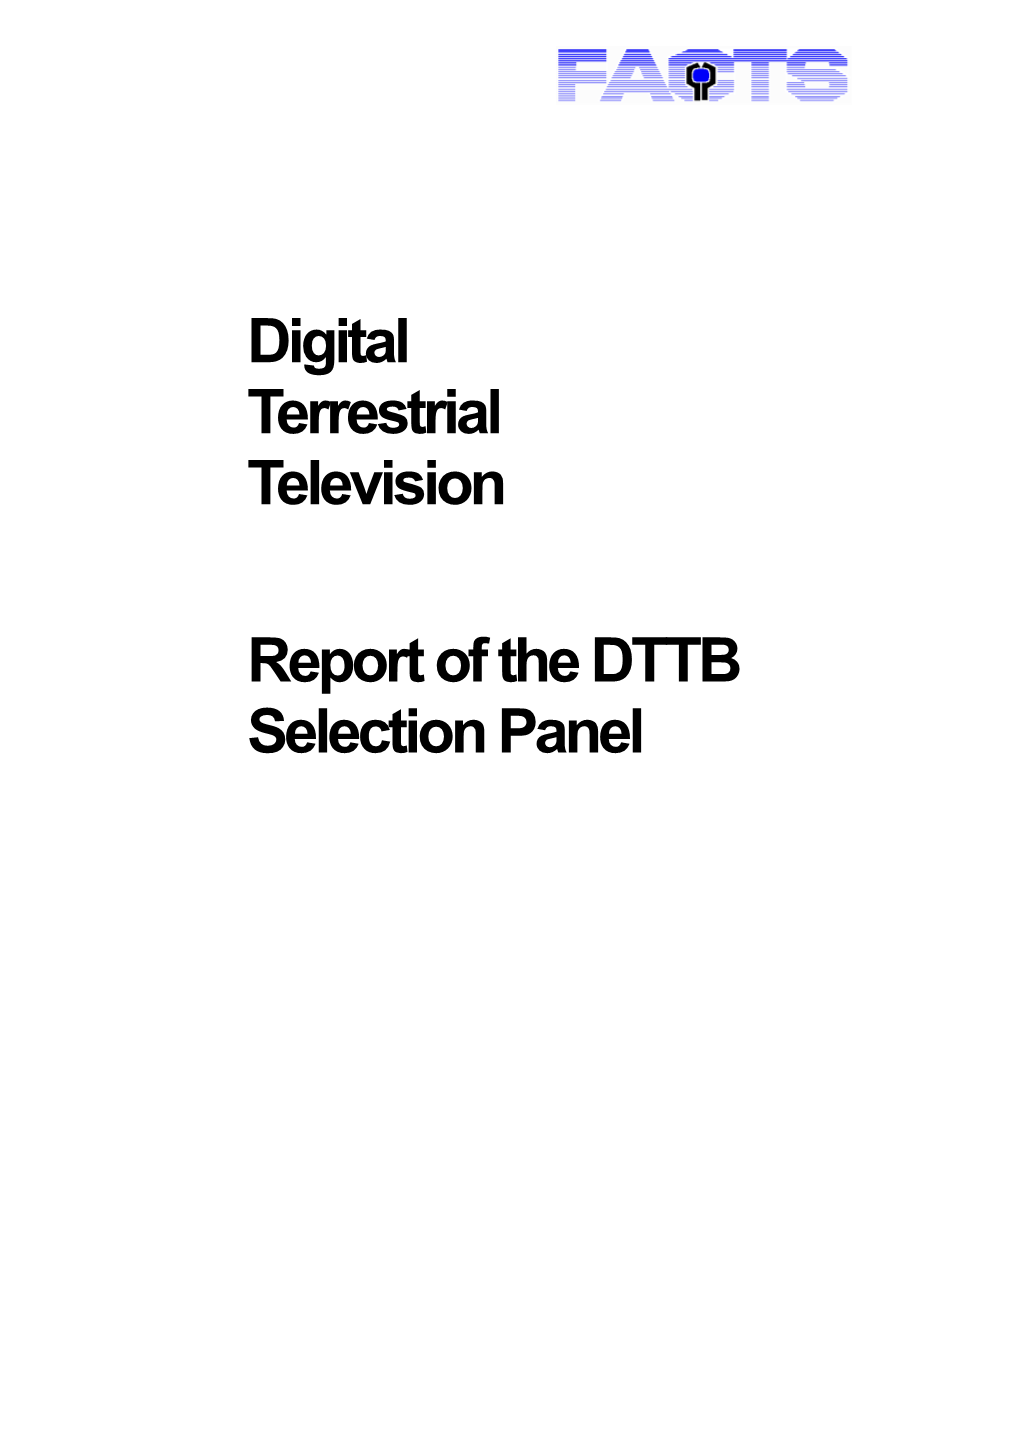 Report of the DTTB Selection Panel